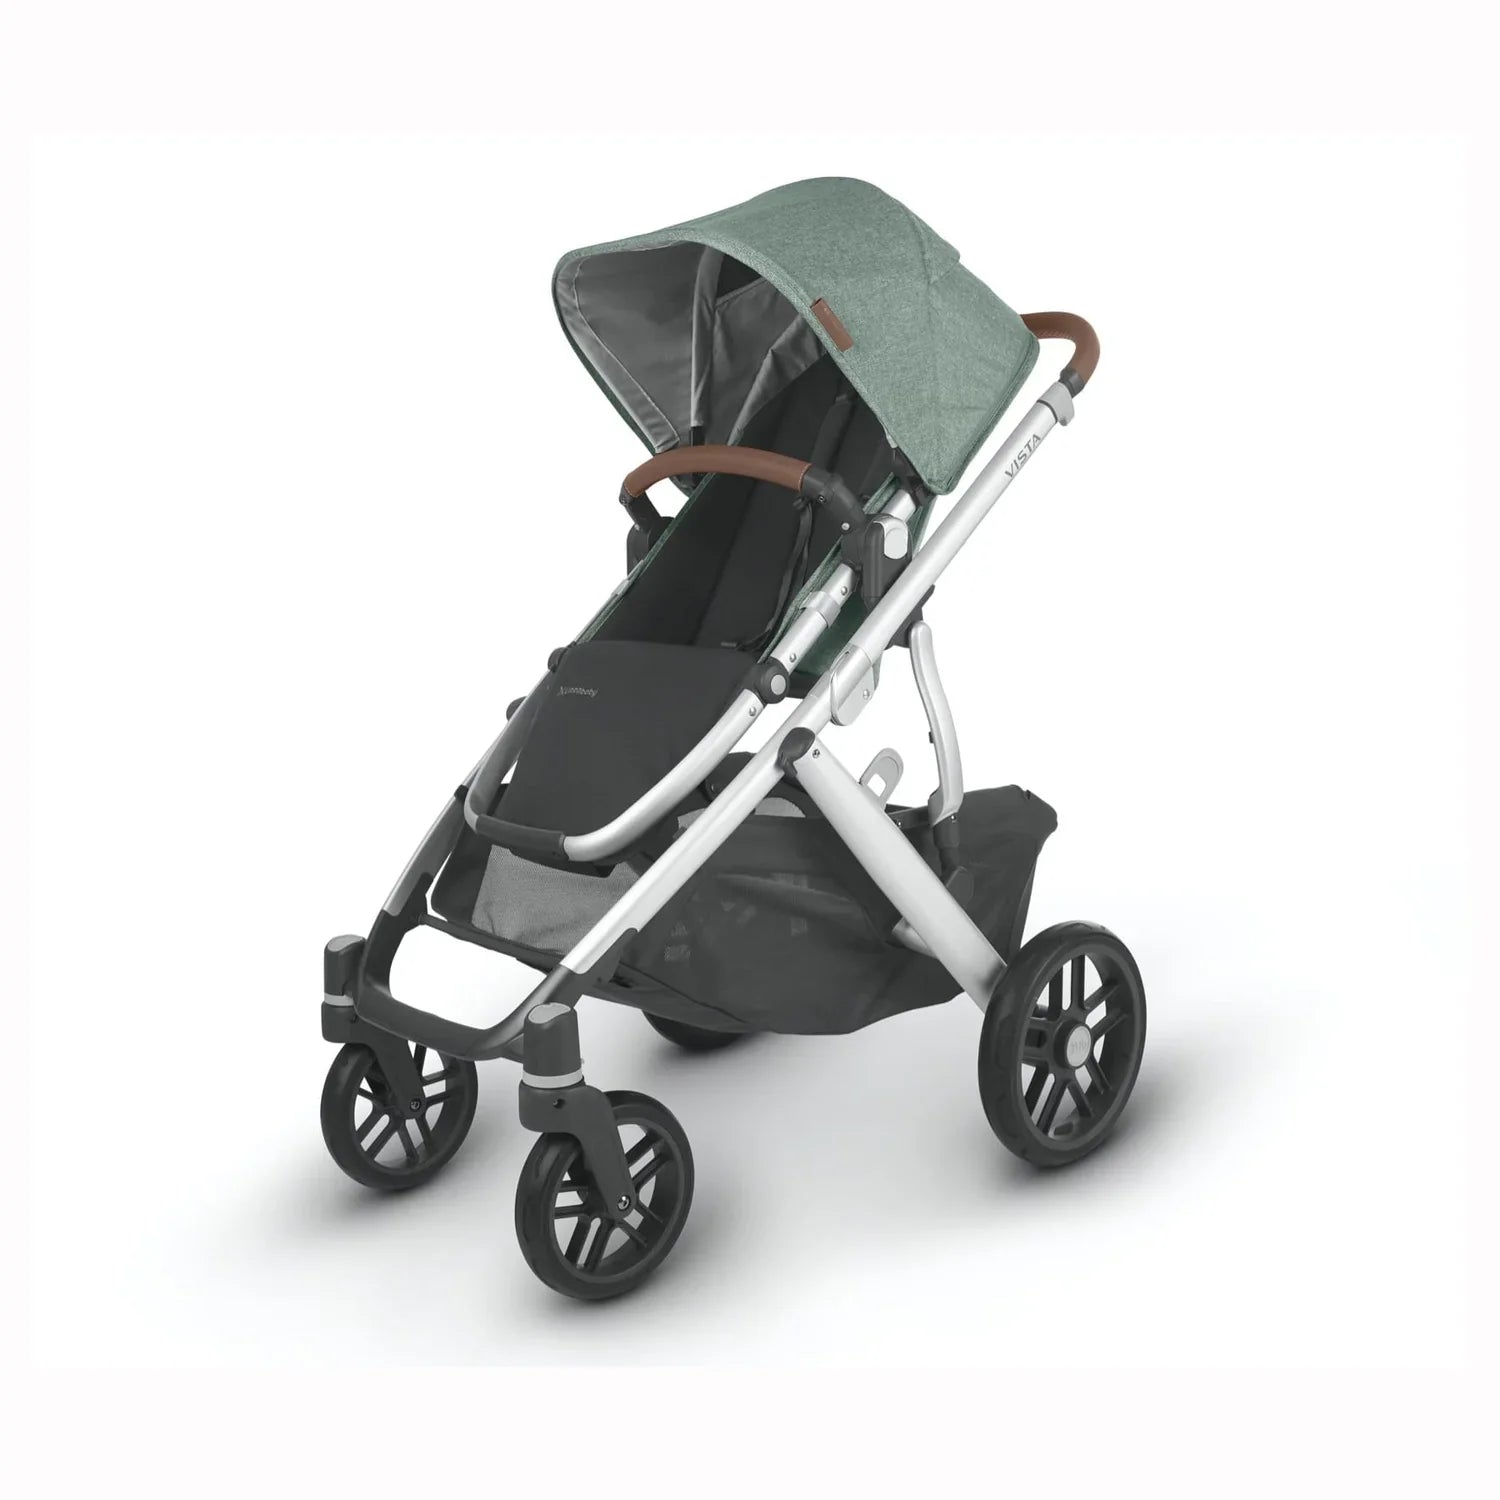 UPPABaby VISTA 2 Stroller &amp; Carry Cot